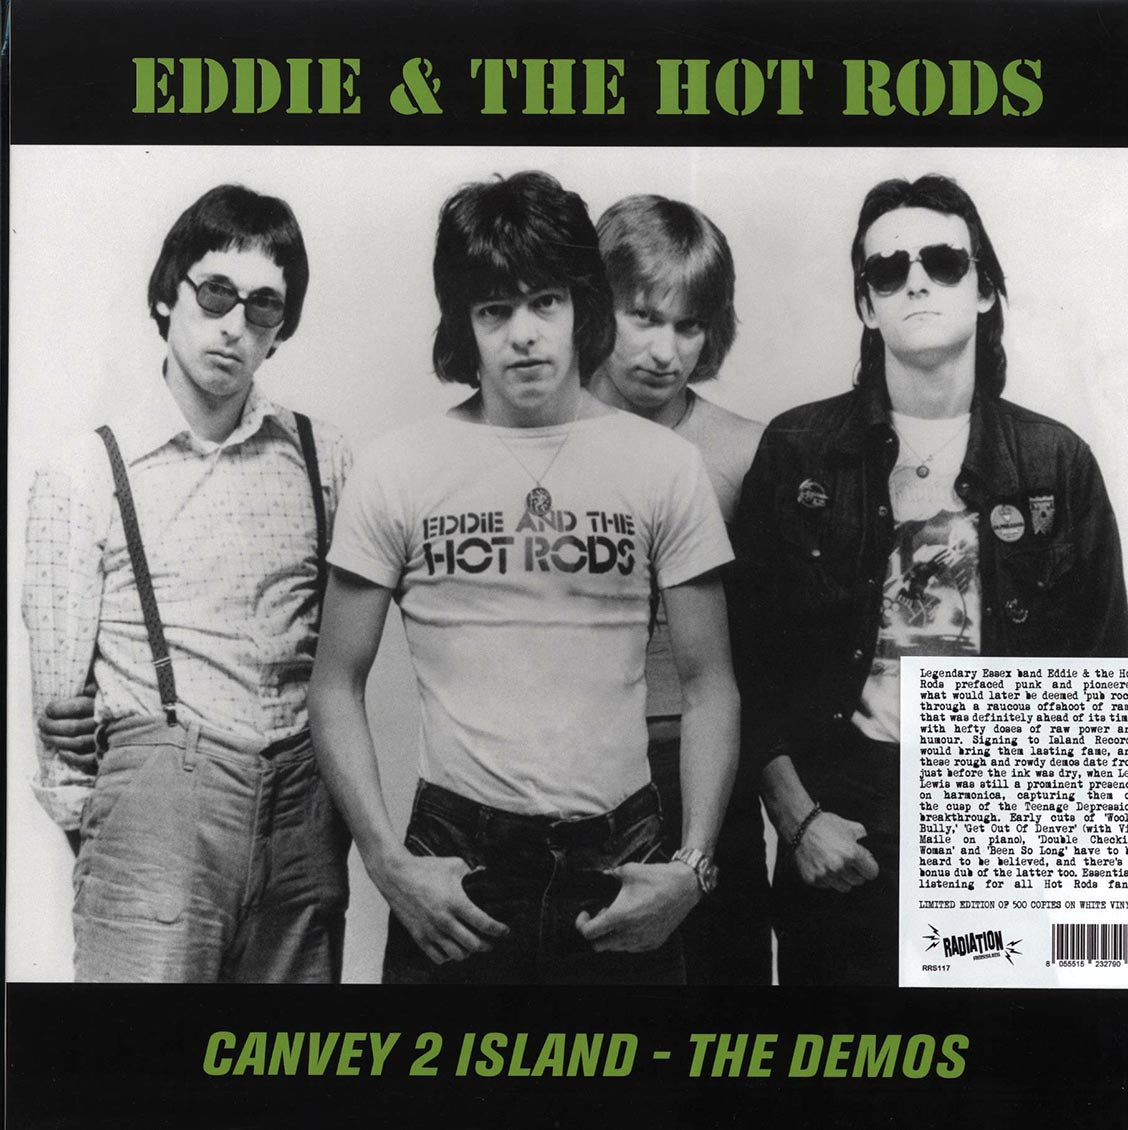 Eddie & The Hot Rods - Canvey 2 Island: The Demos